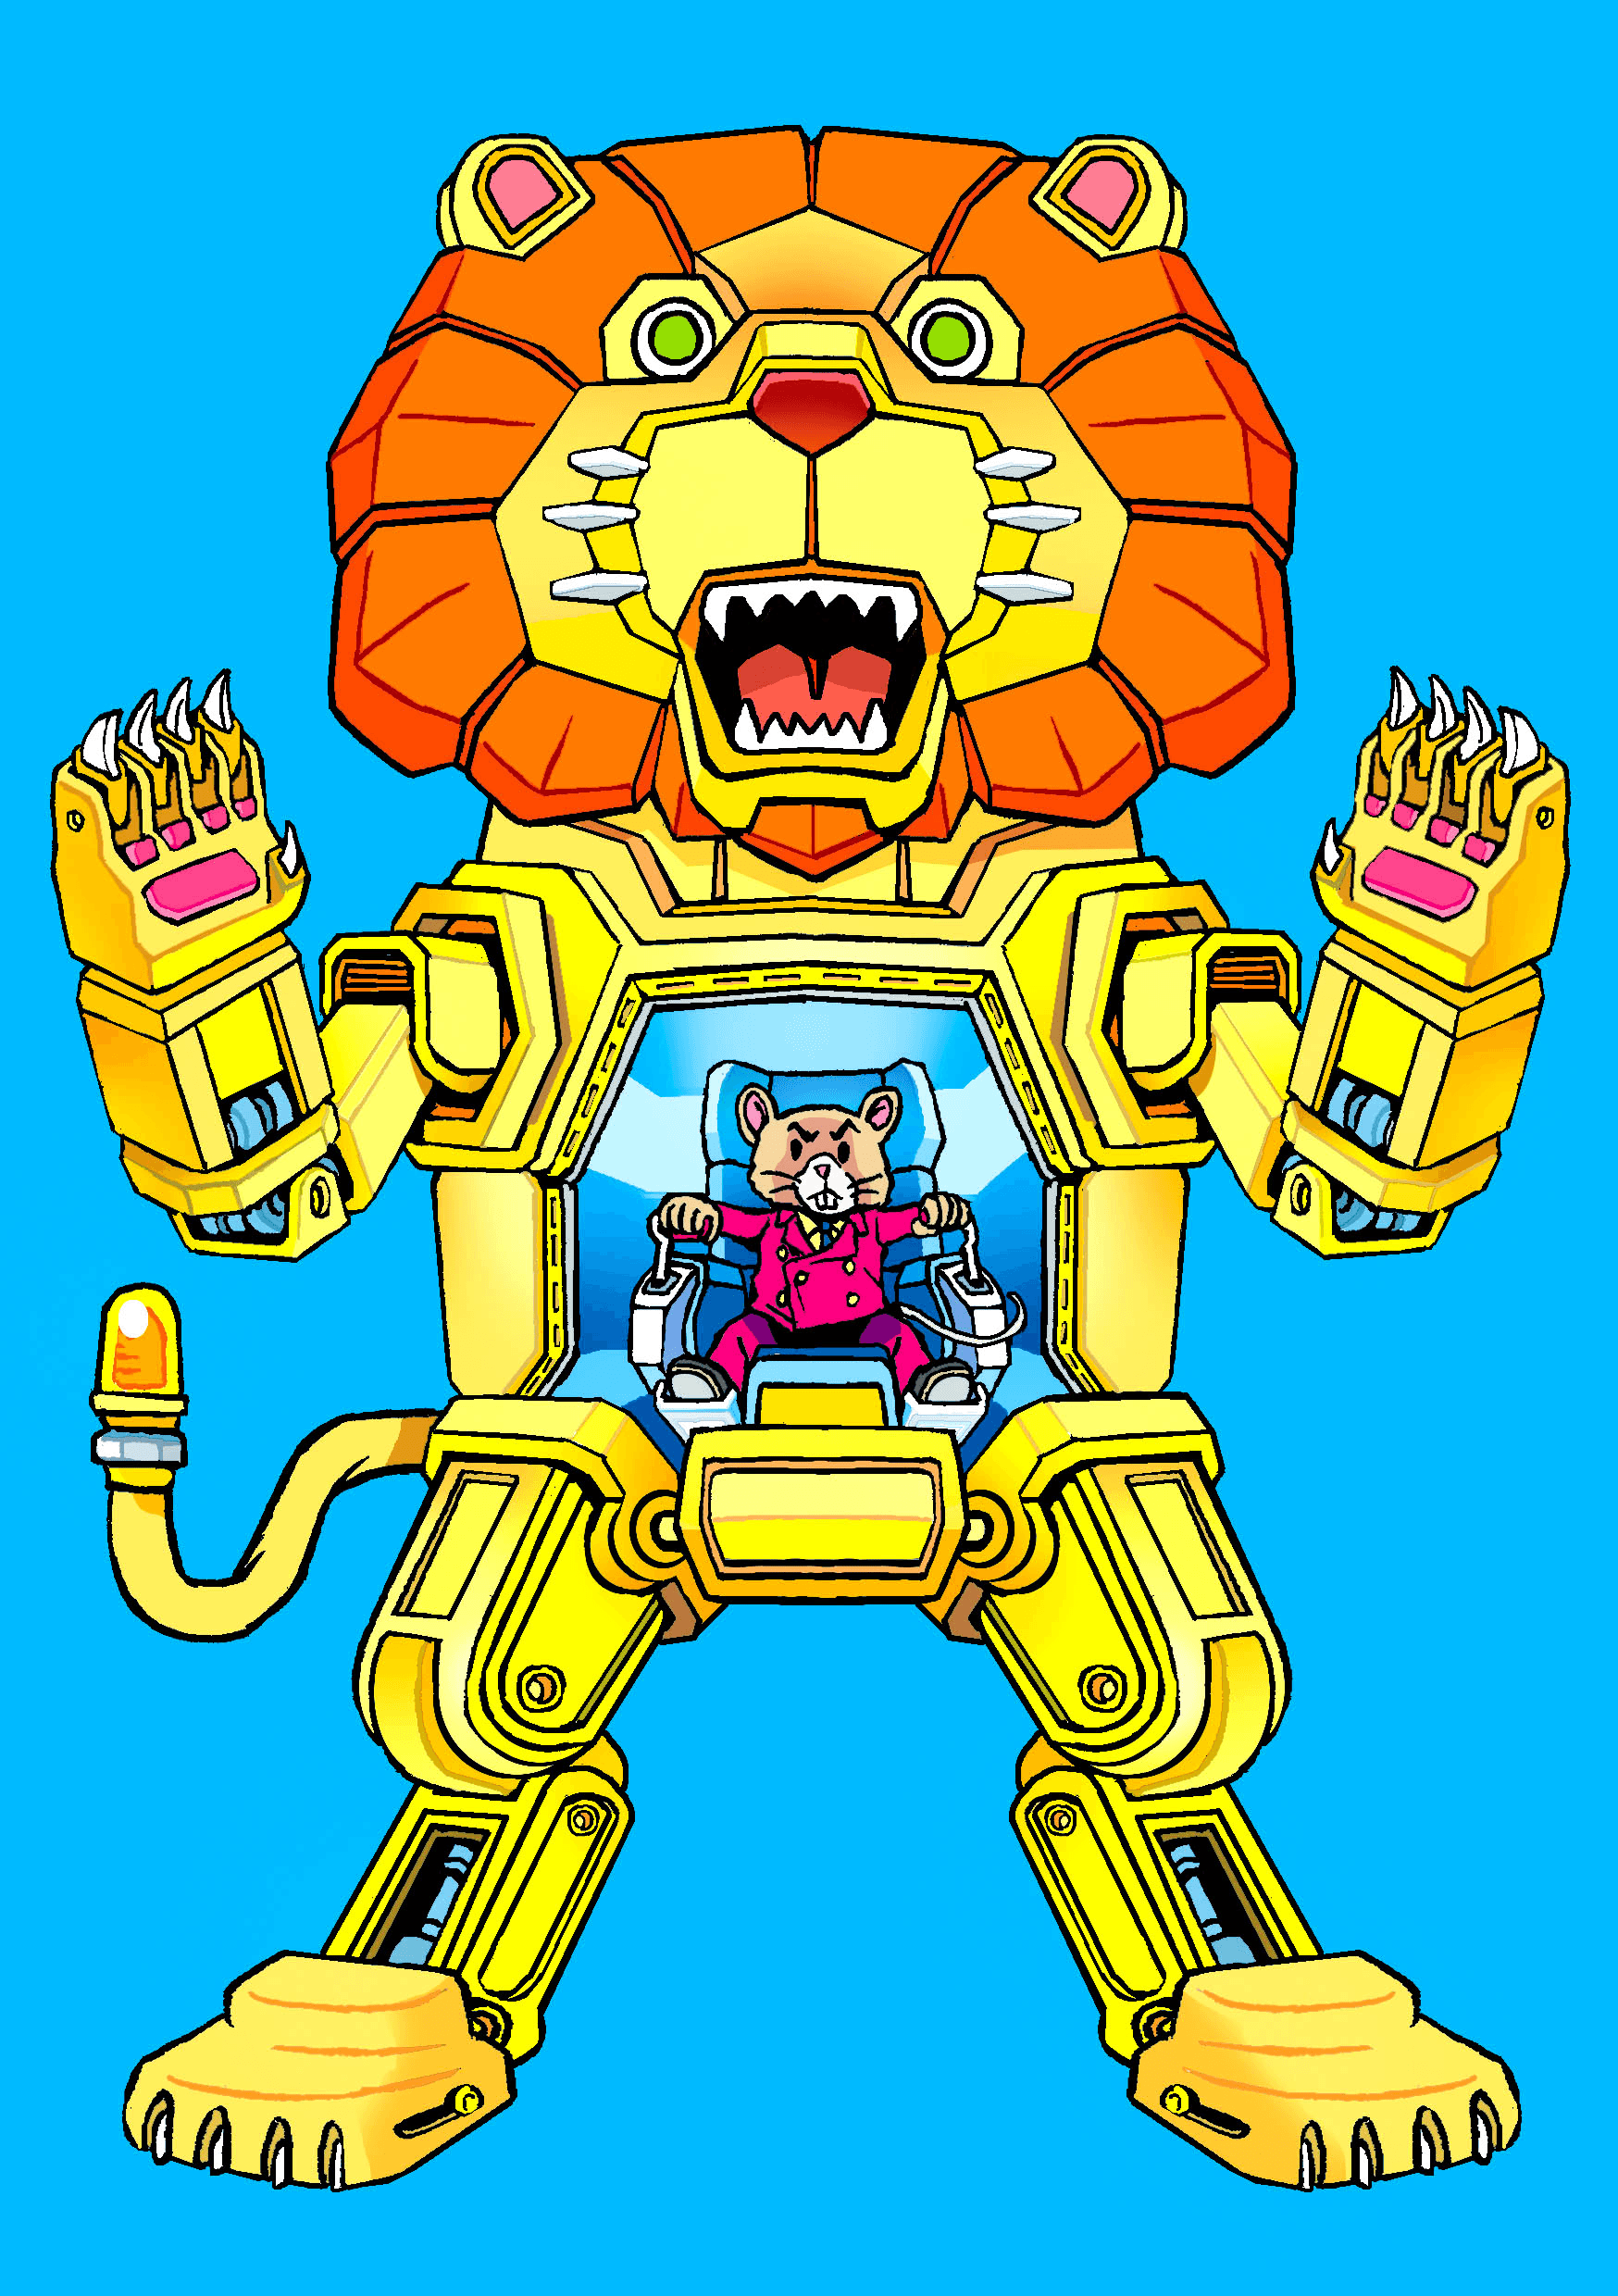 Robo Tribe #017 - Aesop "The Lion & The Mouse"